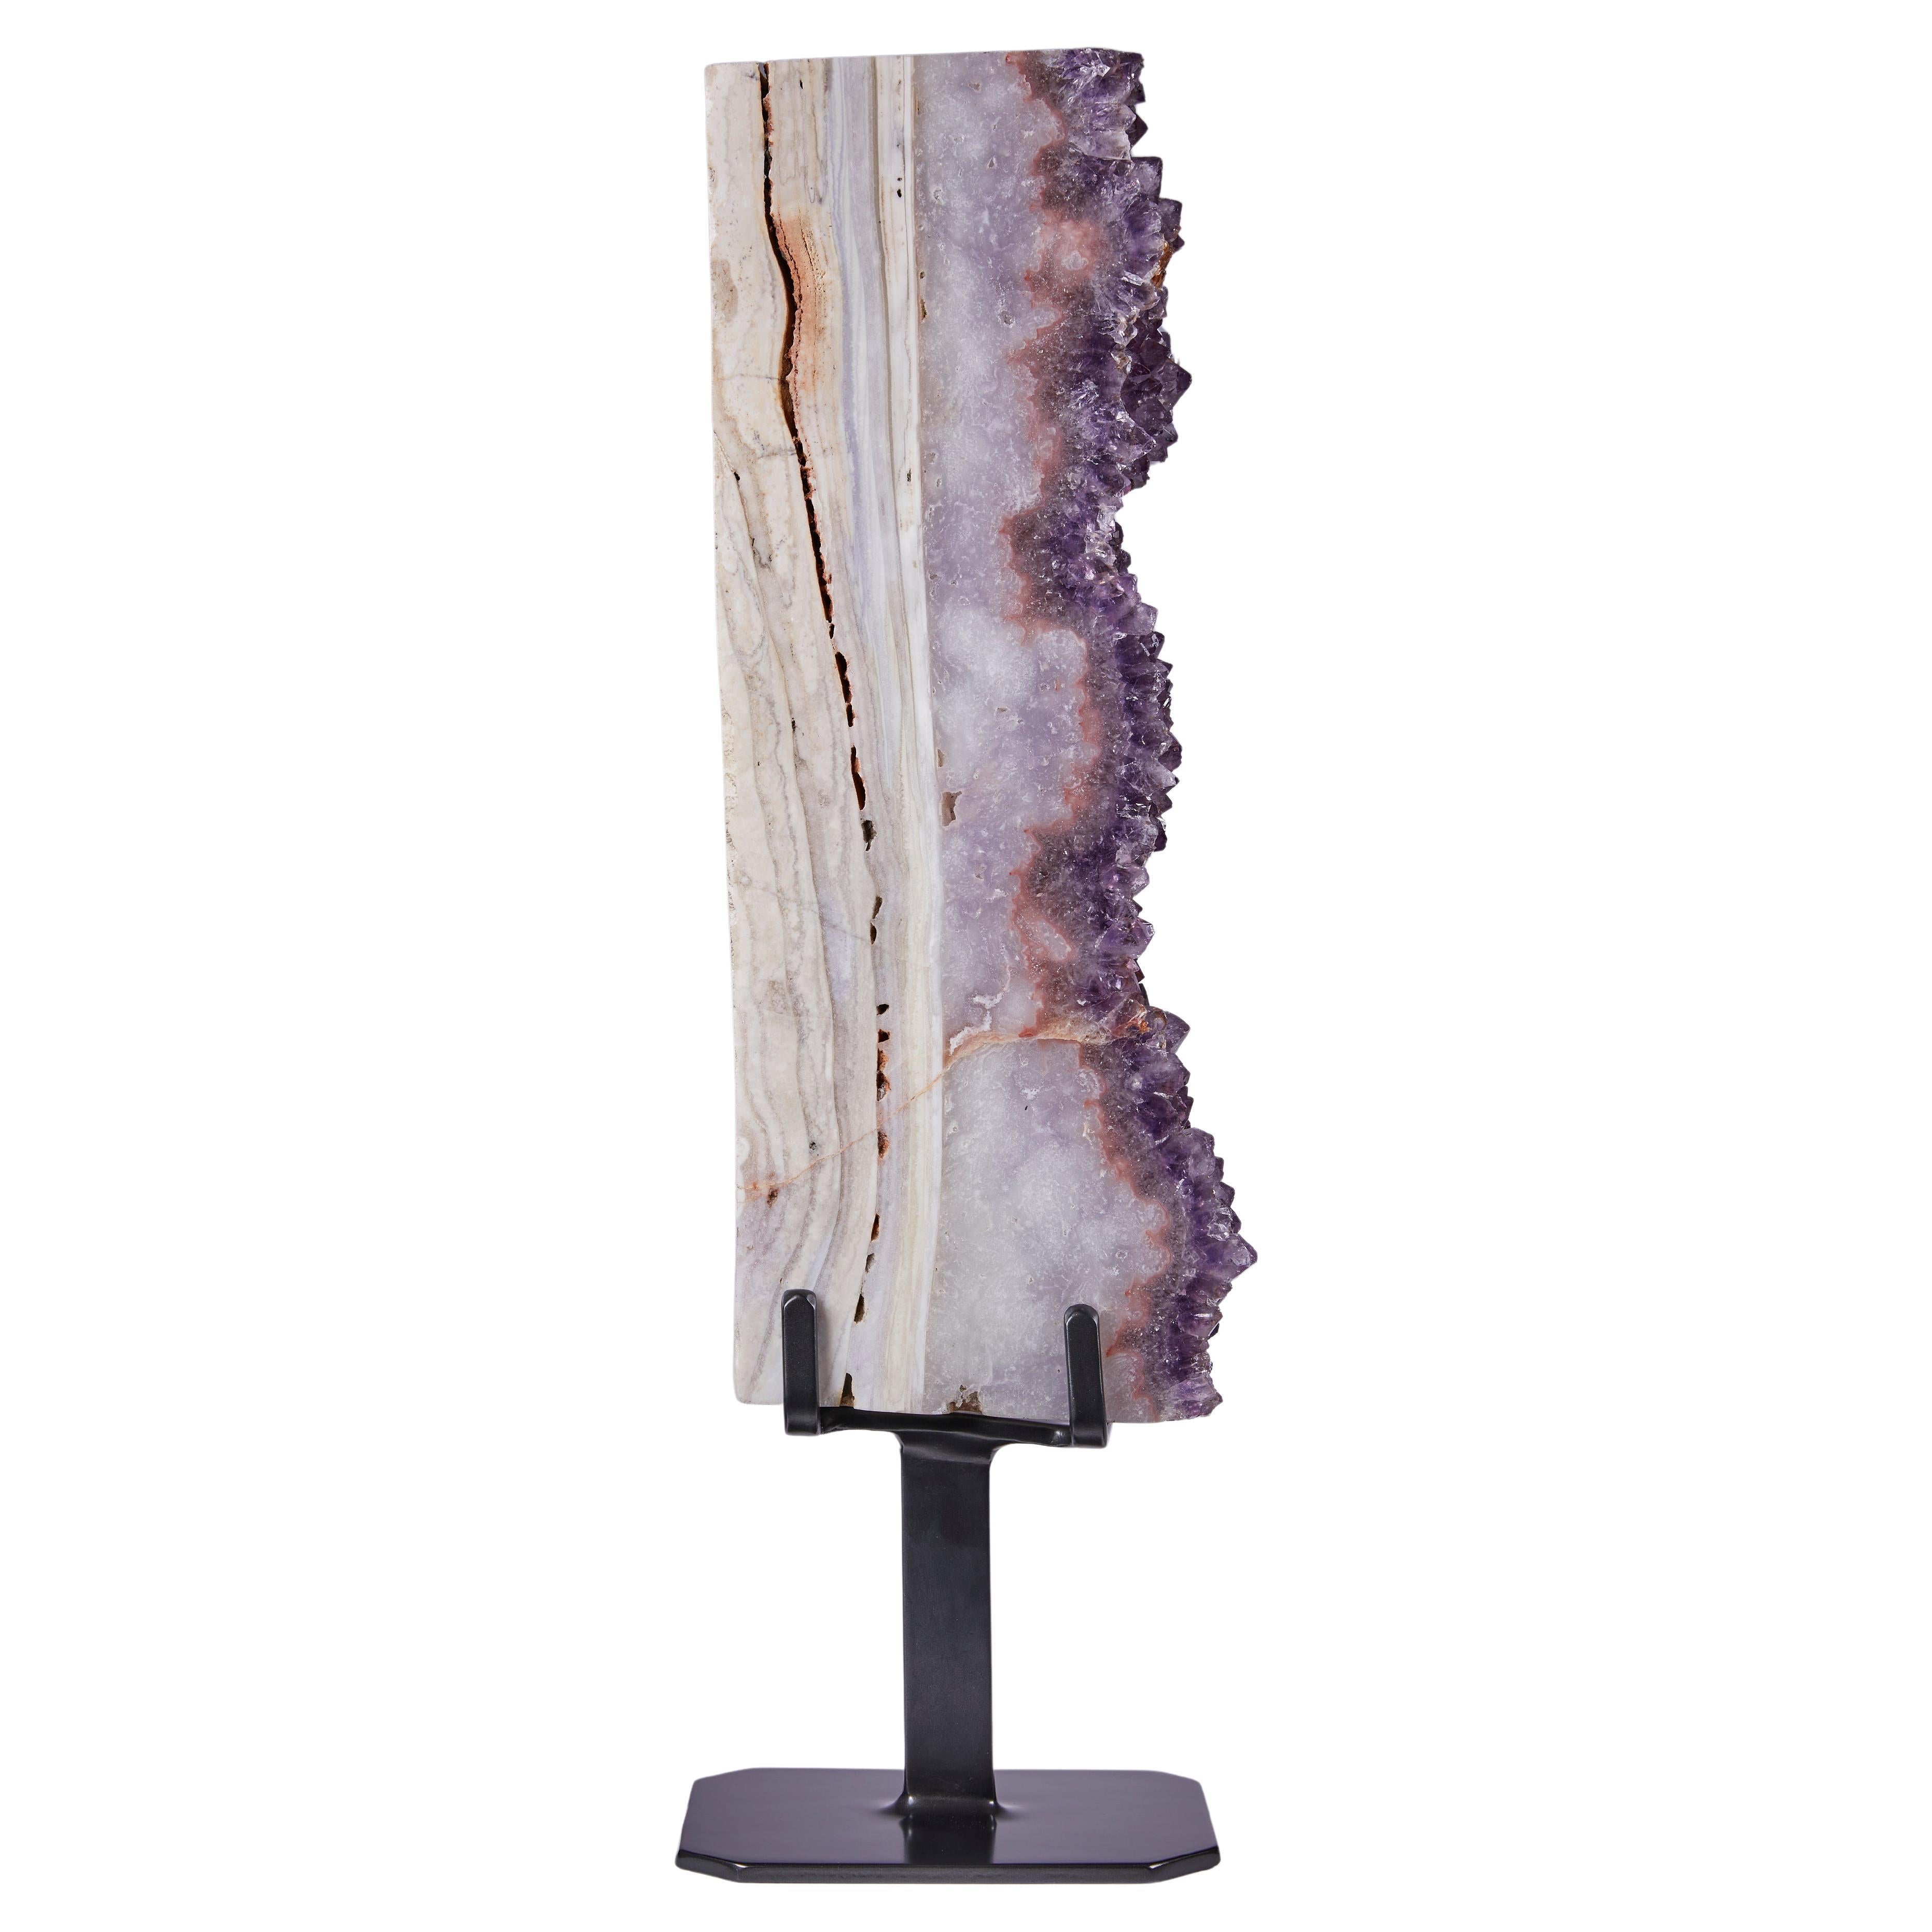 Large columnar agate and amethyst formation For Sale